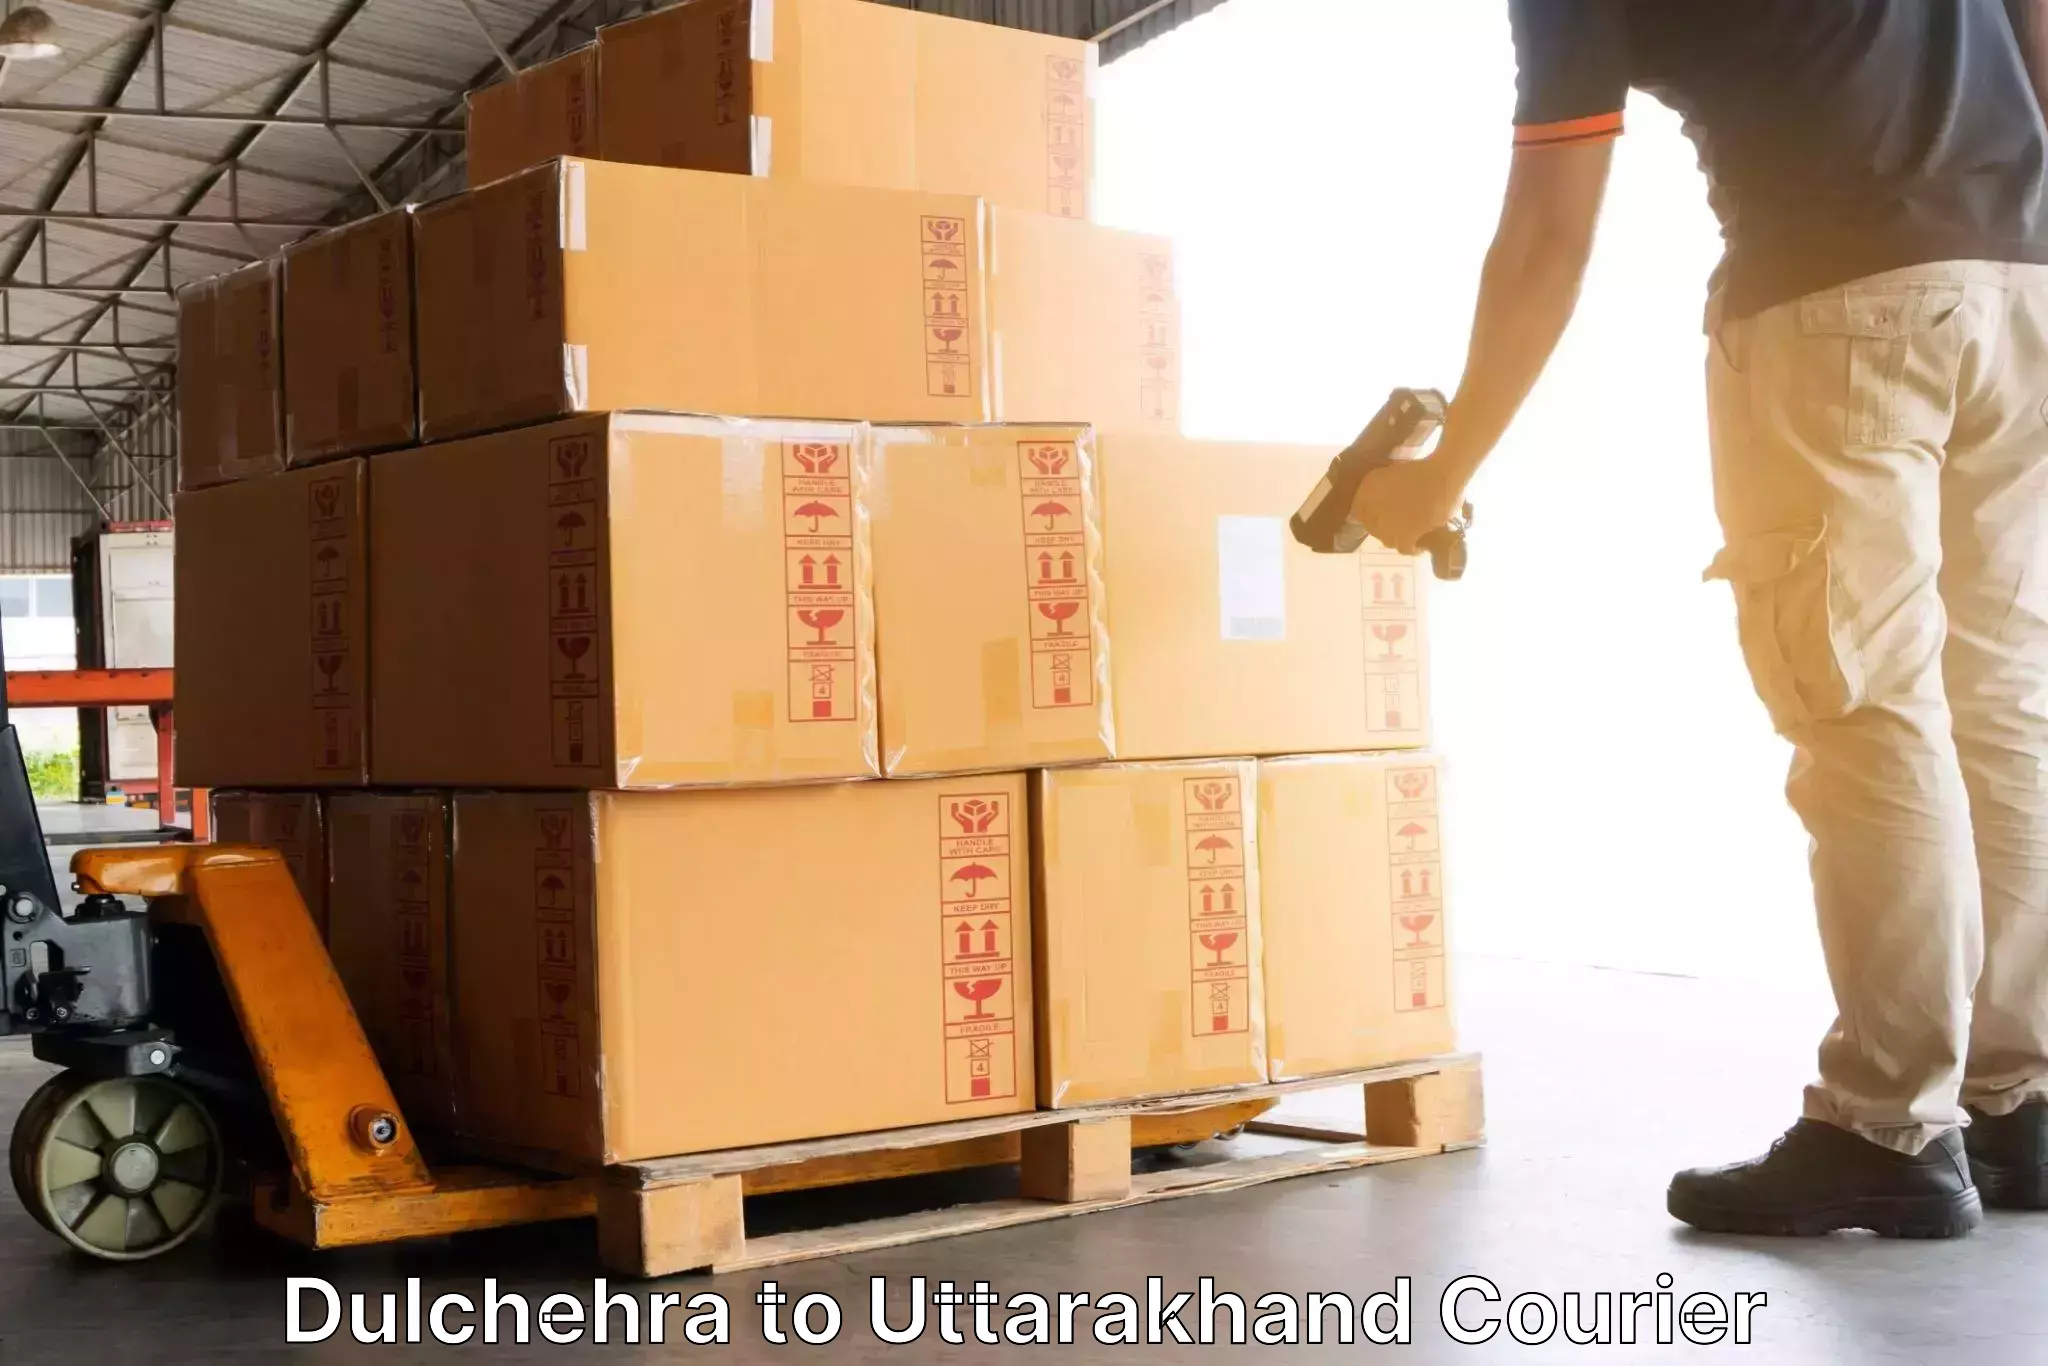 Business logistics support in Dulchehra to Paithani